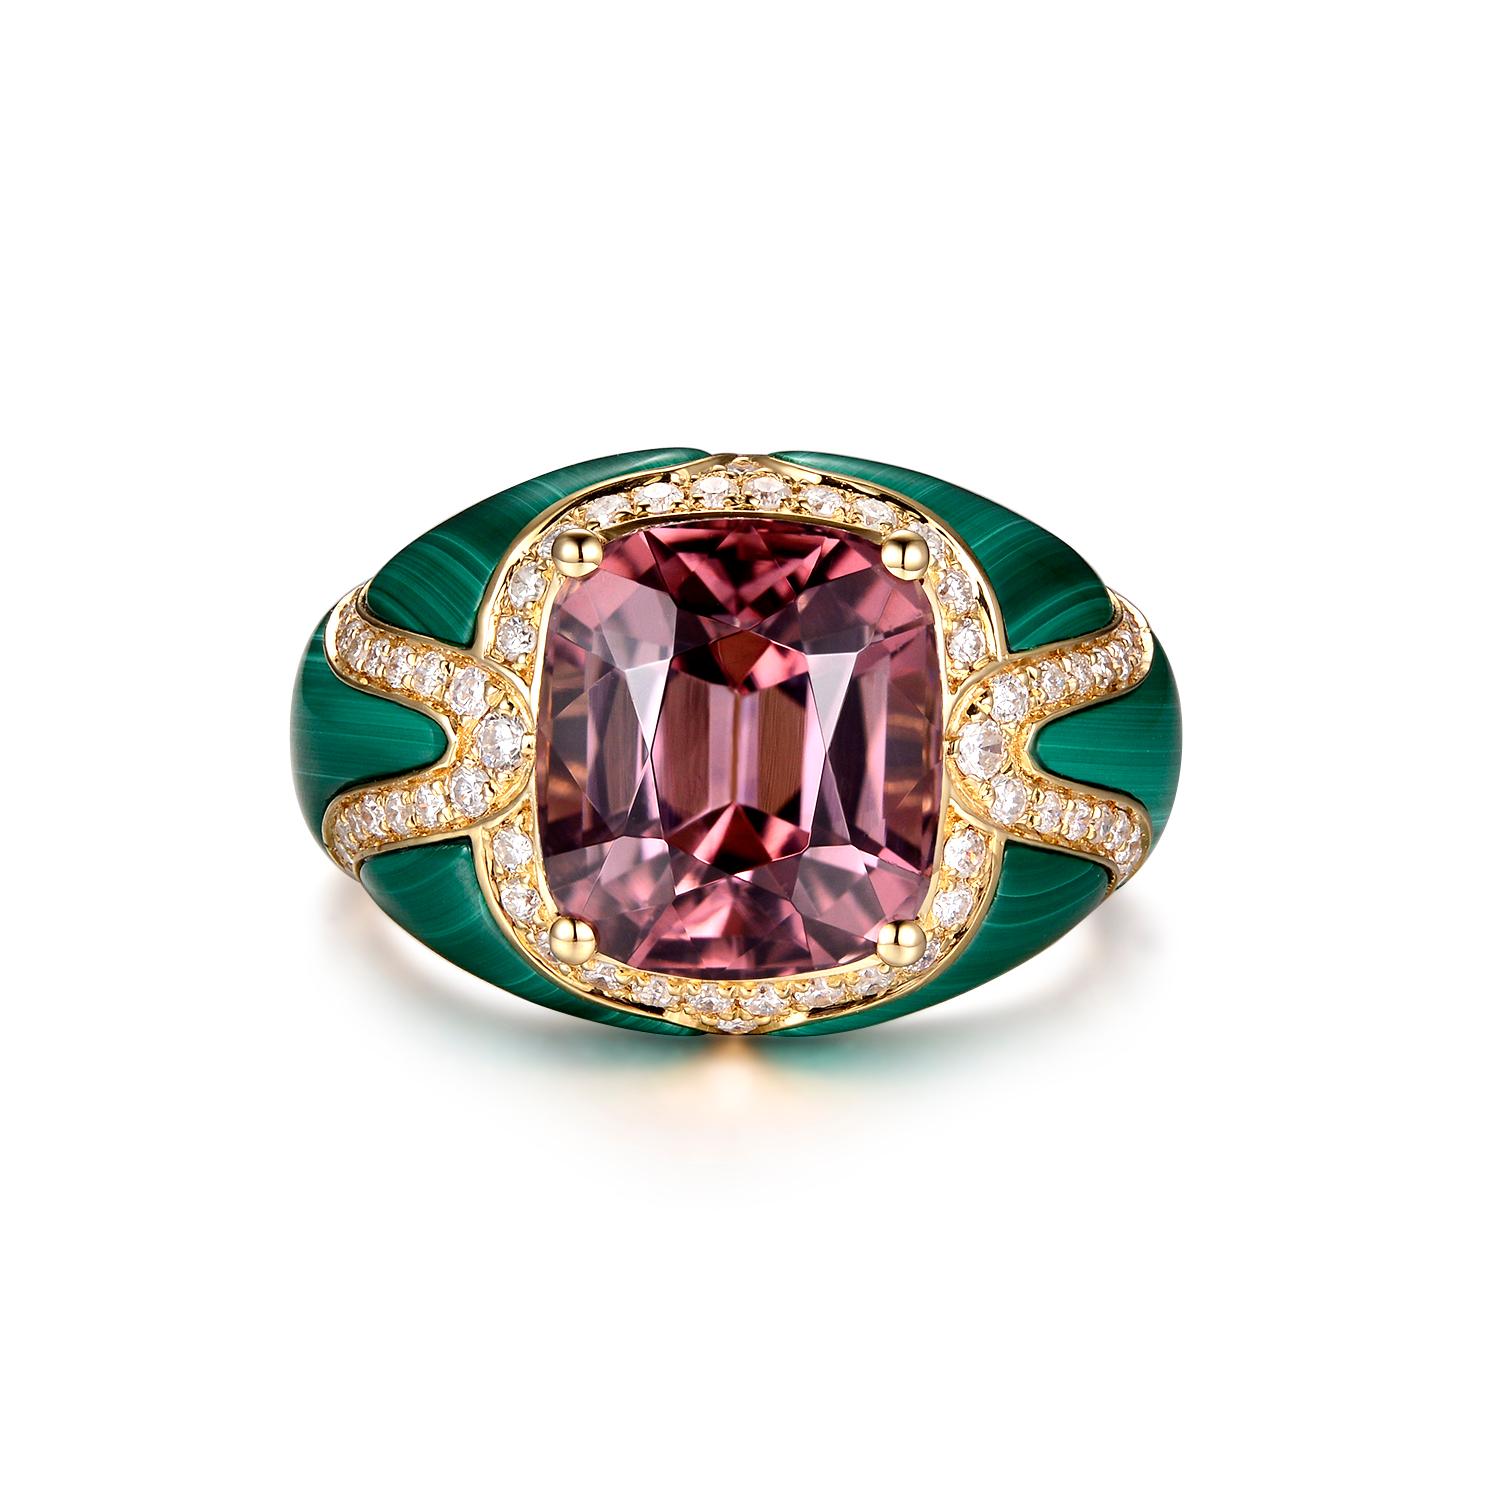 This cocktail ring features a 5.73 carats pink tourmaline, the center stone is pink and purple in color. The malachite is set into the gold mounting and outlined by 0.41 carats of white round diamonds. Truly a special and stunning piece. Handcrafted